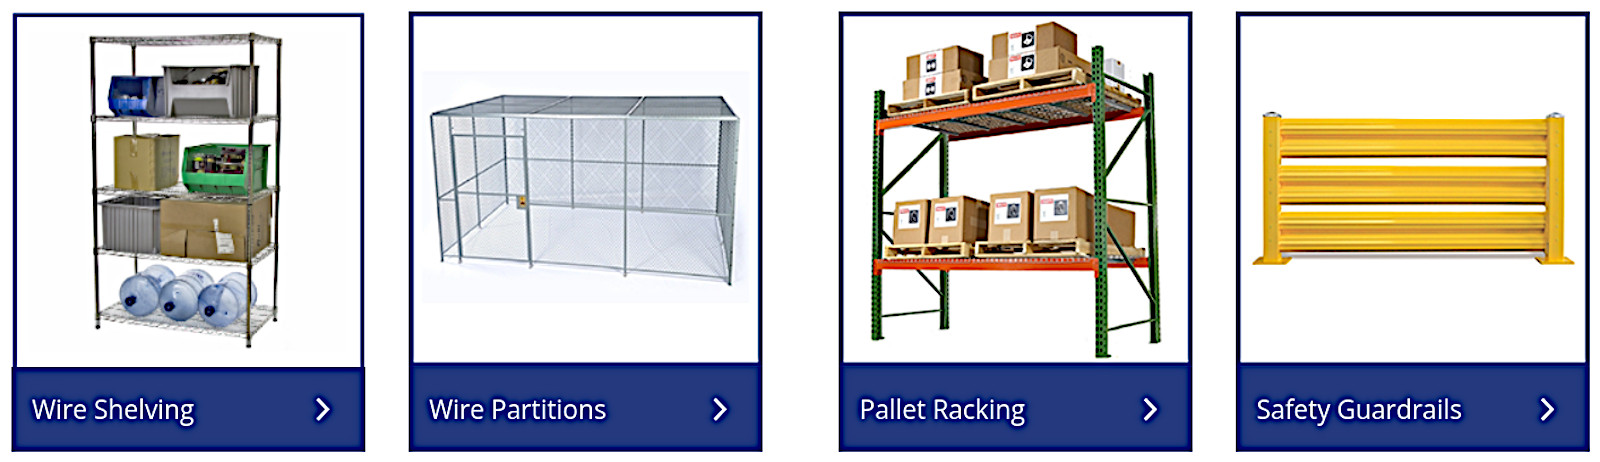 Discounted shelves shelving systems